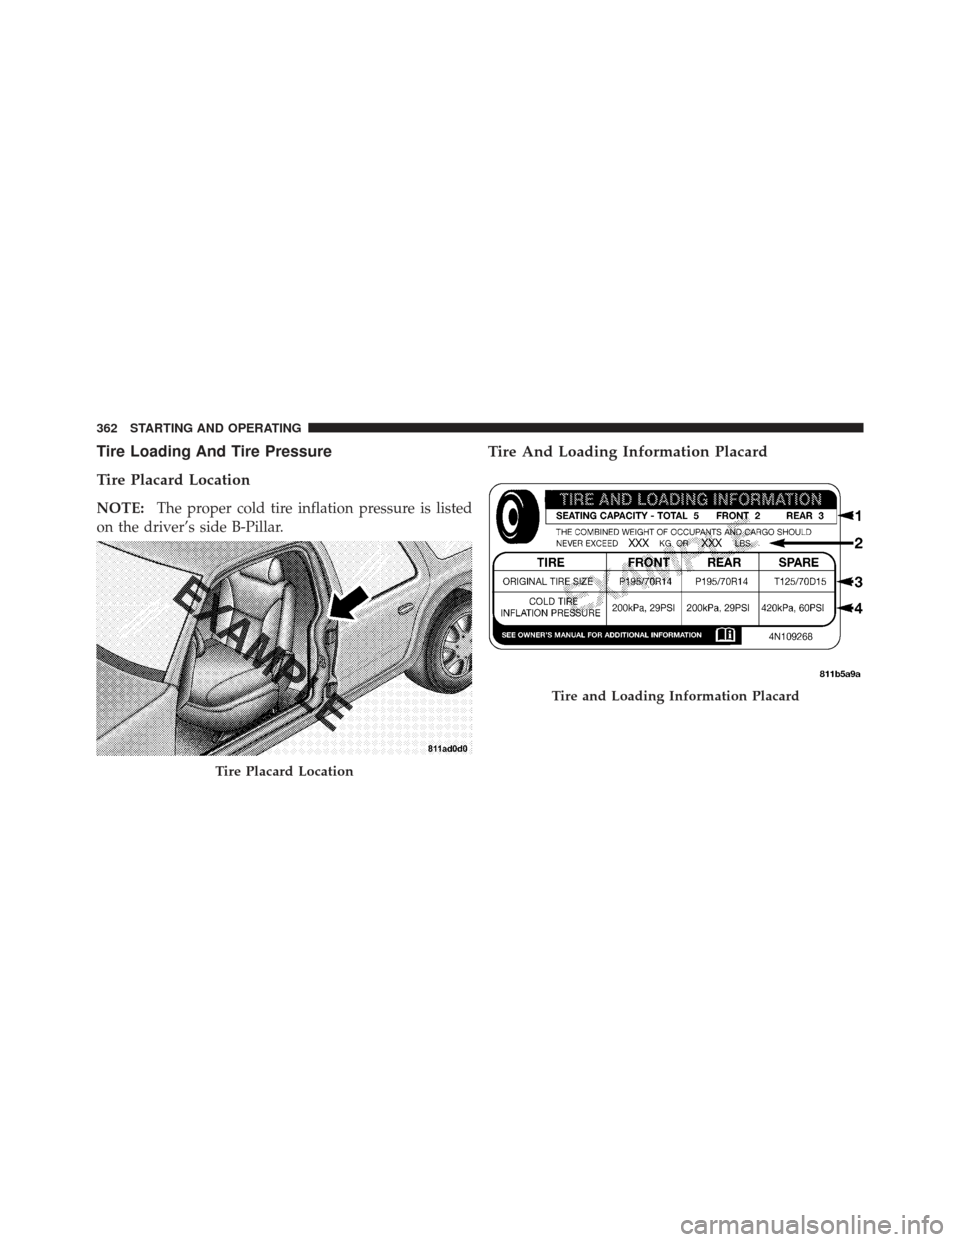 JEEP LIBERTY 2011 KK / 2.G Owners Manual Tire Loading And Tire Pressure
Tire Placard Location
NOTE:The proper cold tire inflation pressure is listed
on the driver’s side B-Pillar.
Tire And Loading Information Placard
Tire Placard Location
